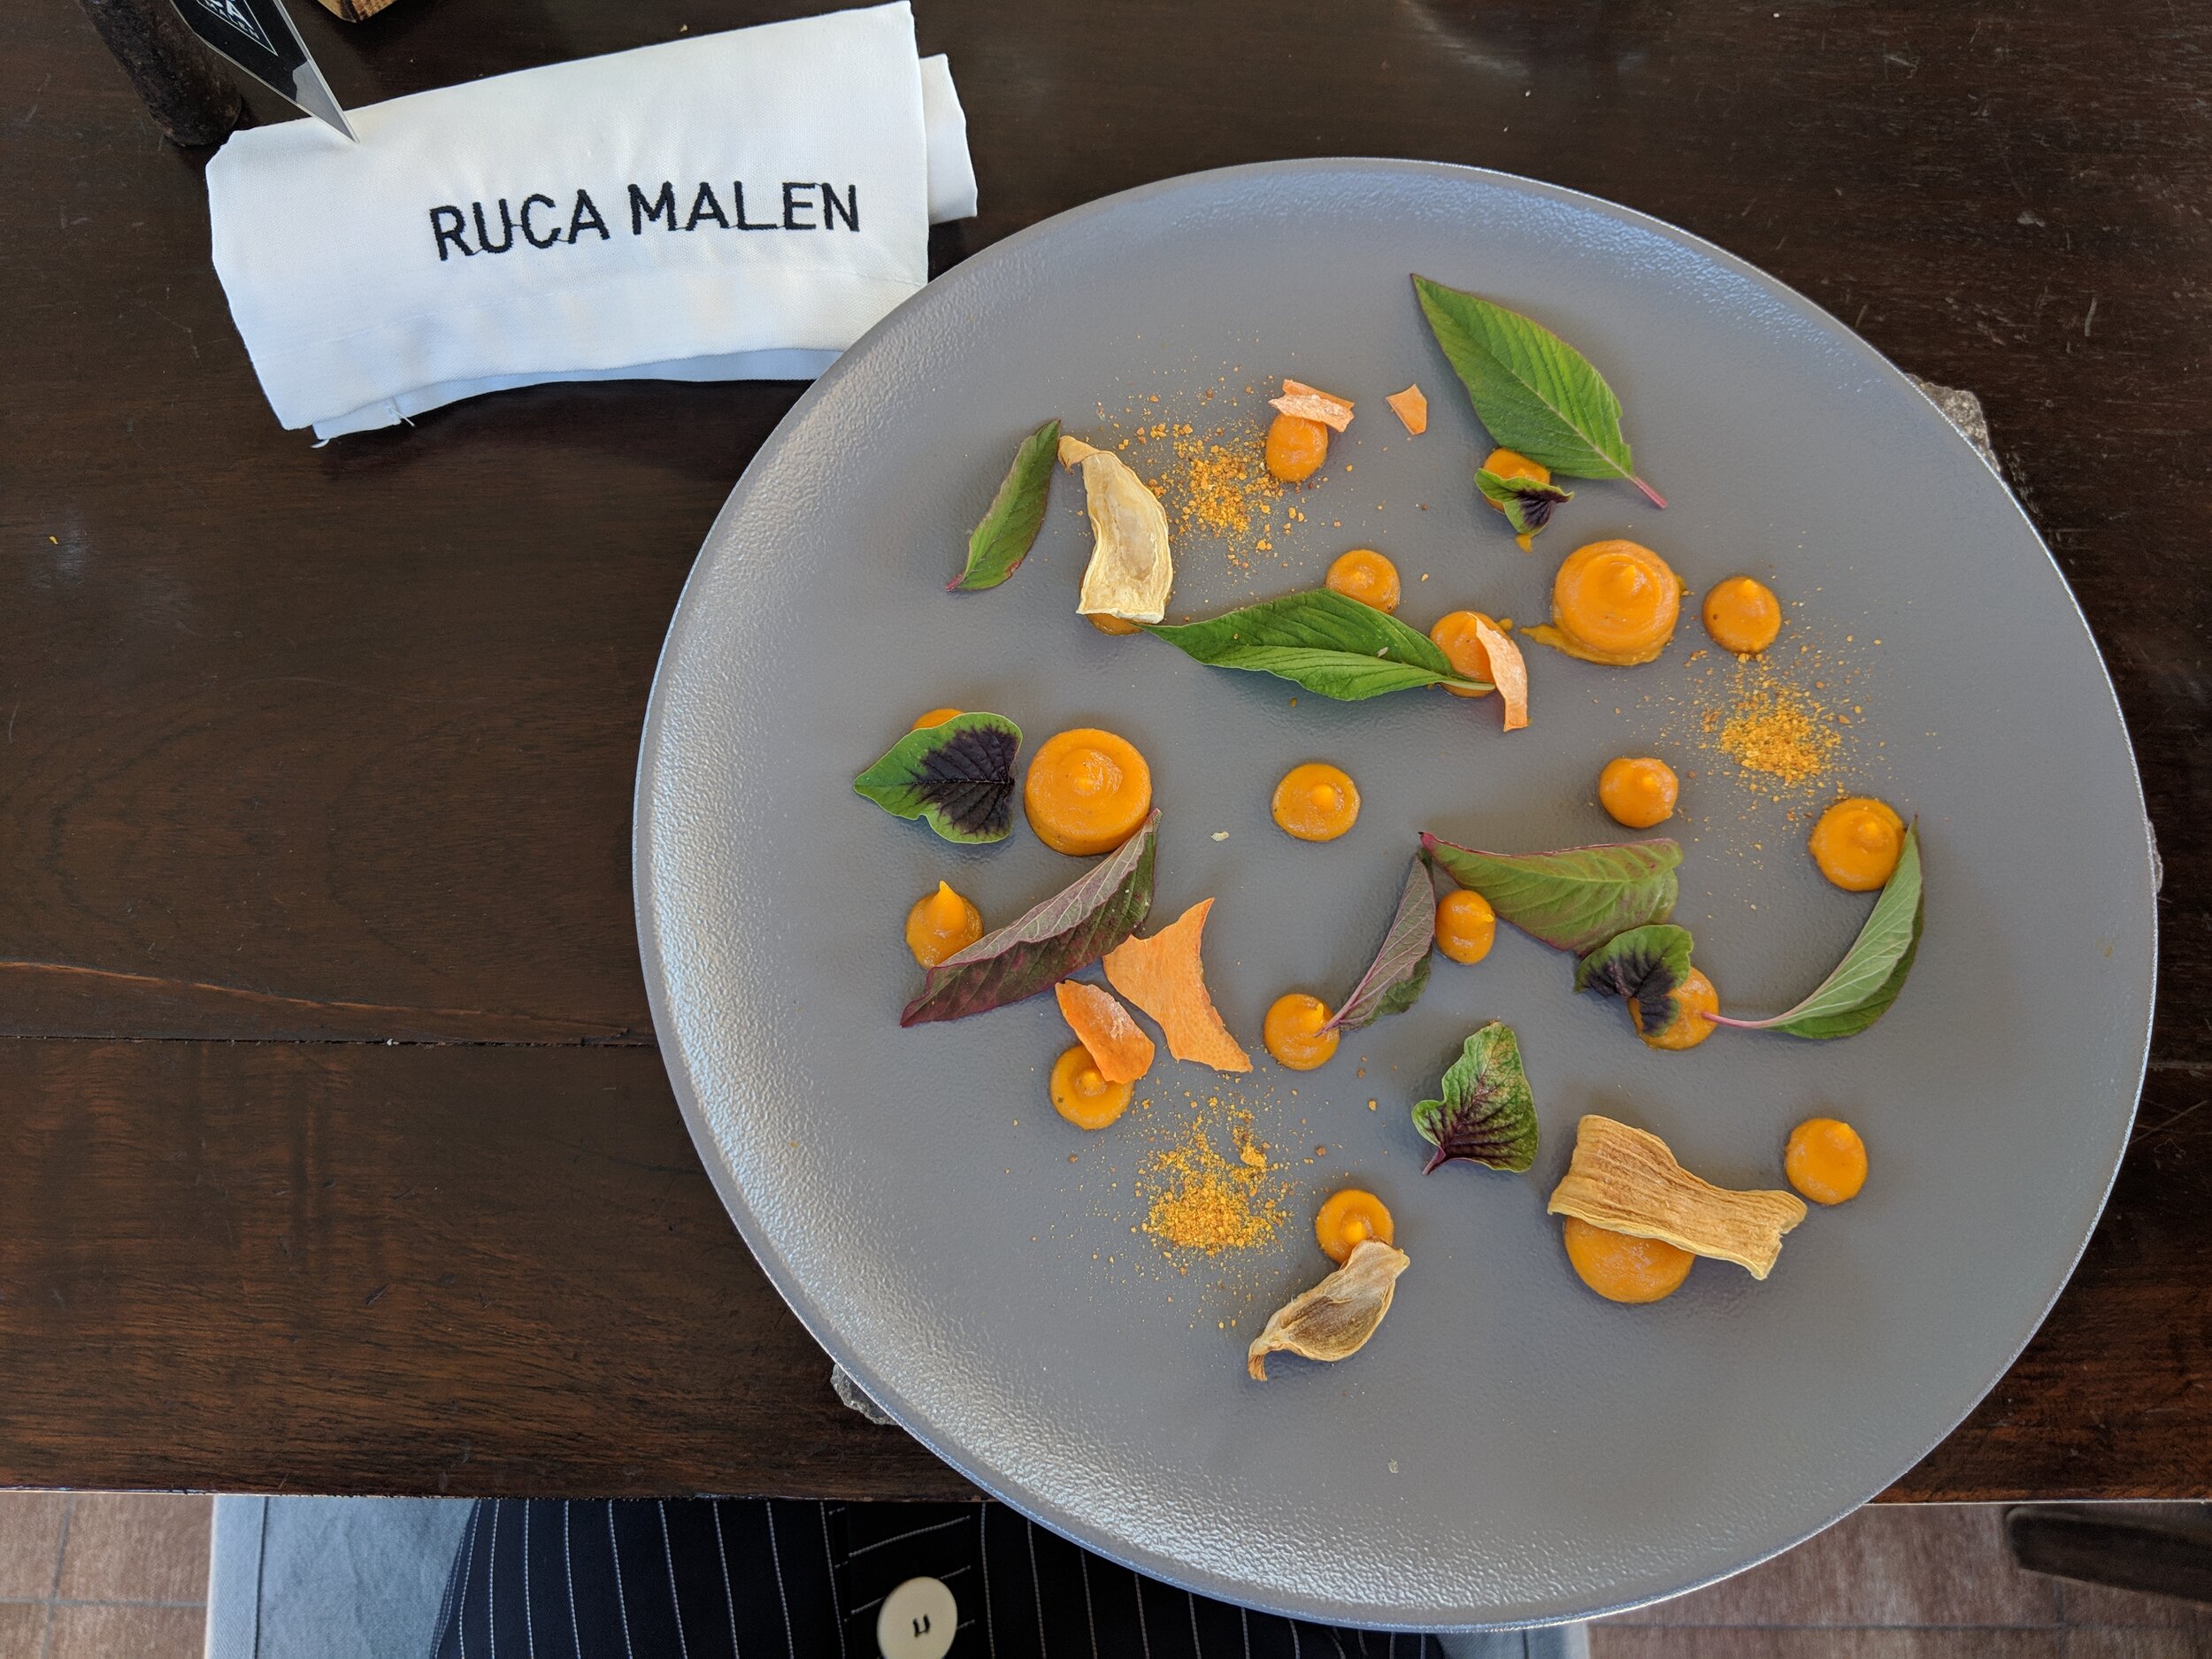 colourful food plate from Ruca Malen restaurant in Mendoza